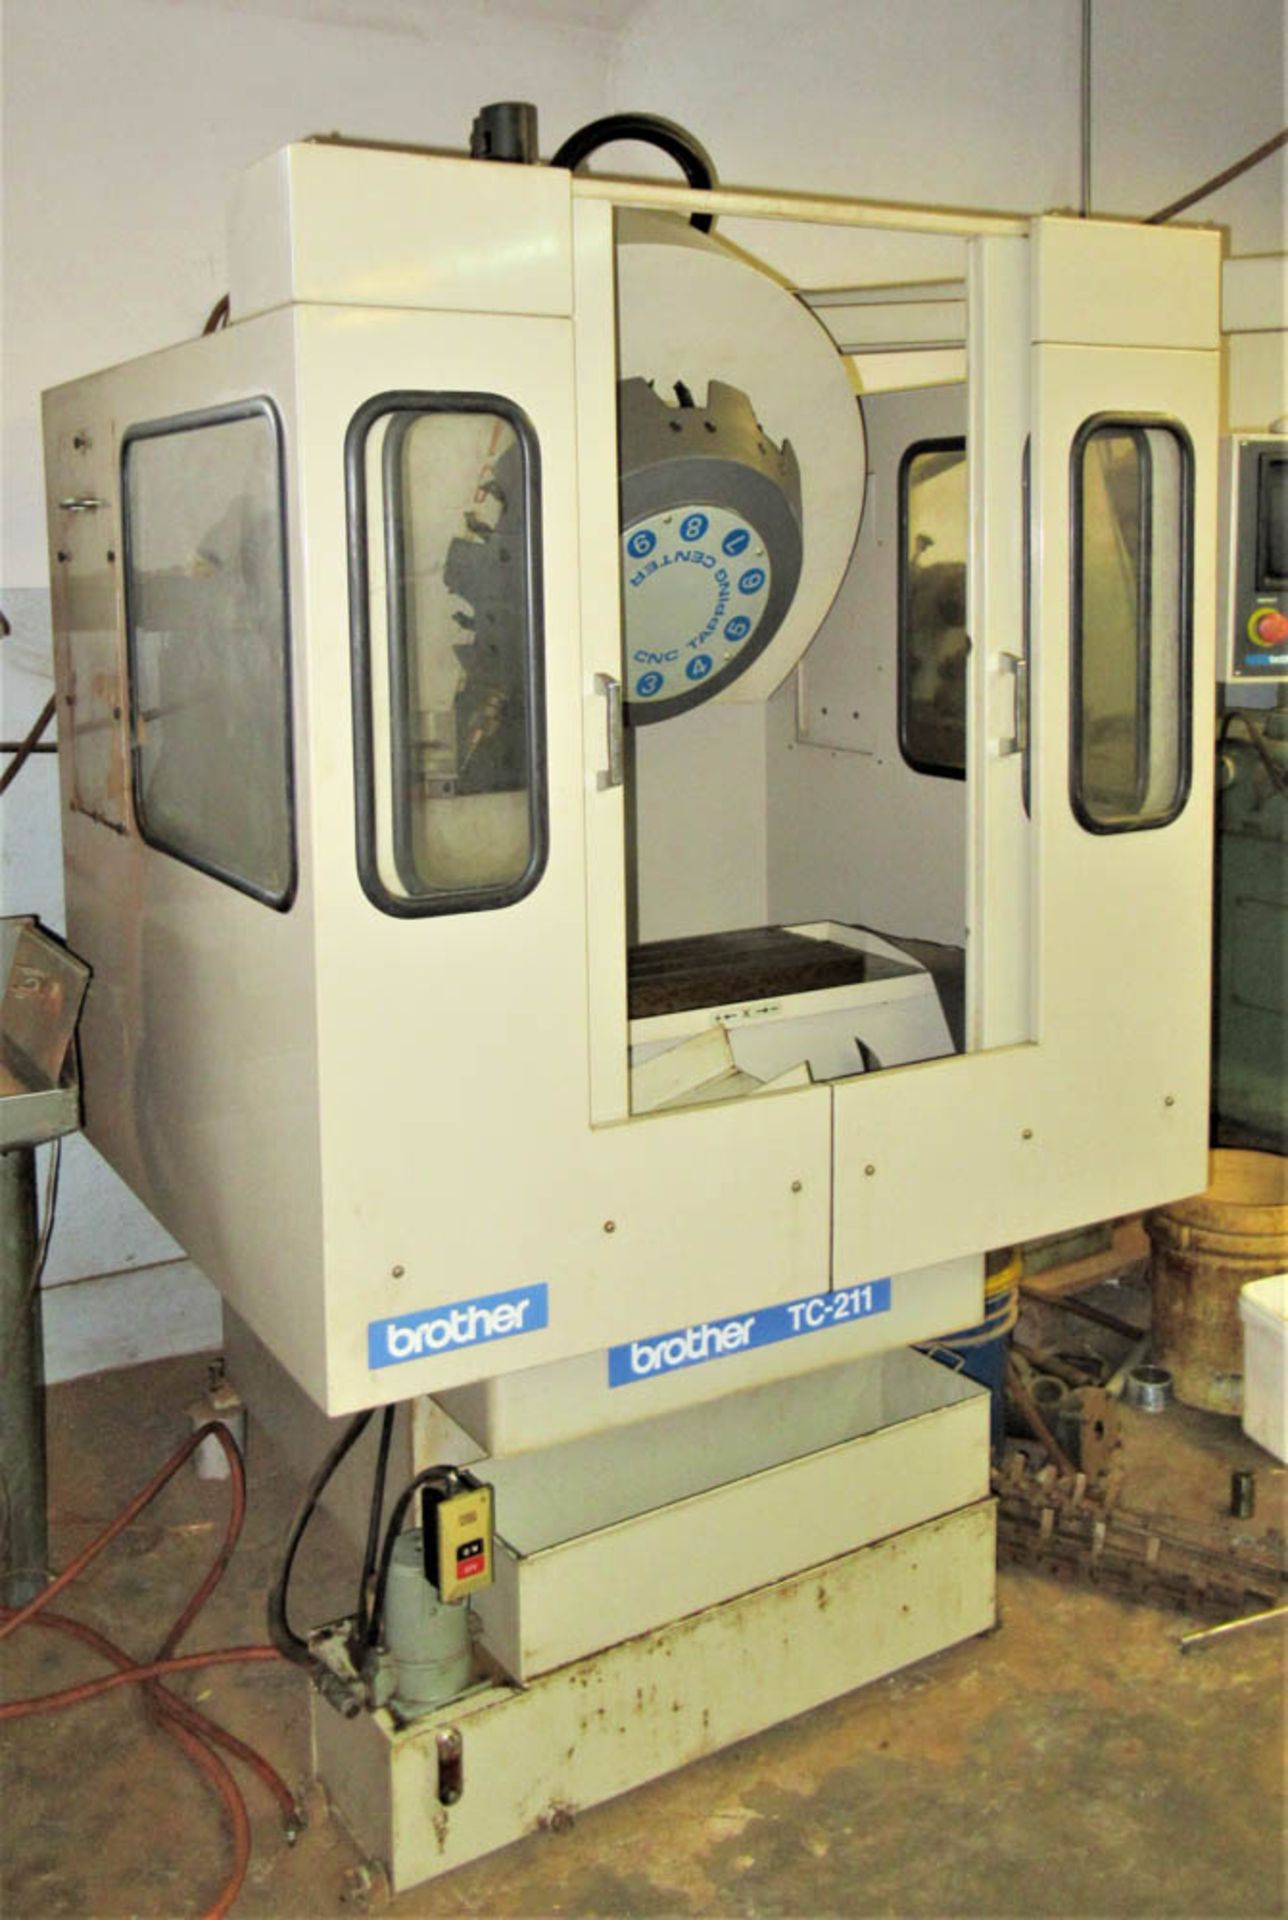 BROTHER MDL. TC-211 CNC DRILLING AND TAPPING MACHINE, 10-POSITION TURRET, S/N: 111765 [LOCATED IN